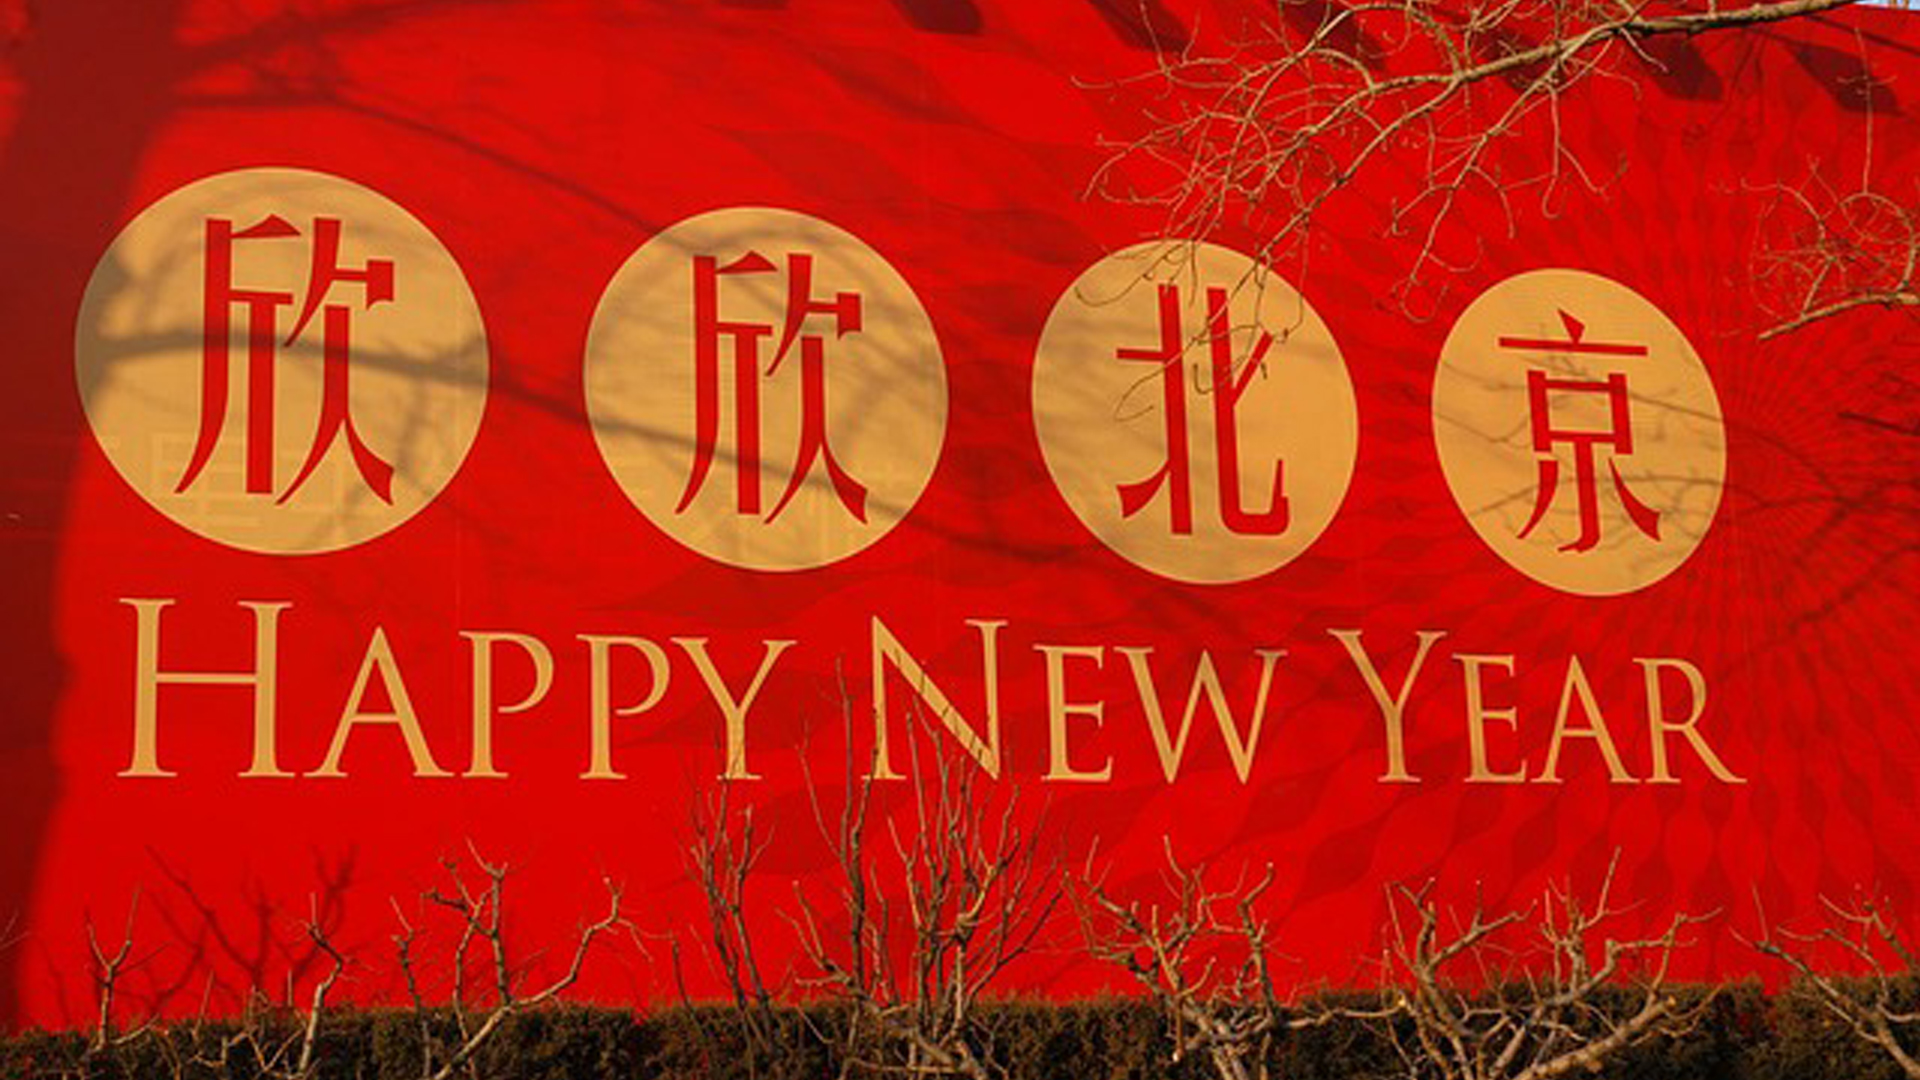 A photo of a printed red banner that reads "Happy New Year" placed above some bushes outside.